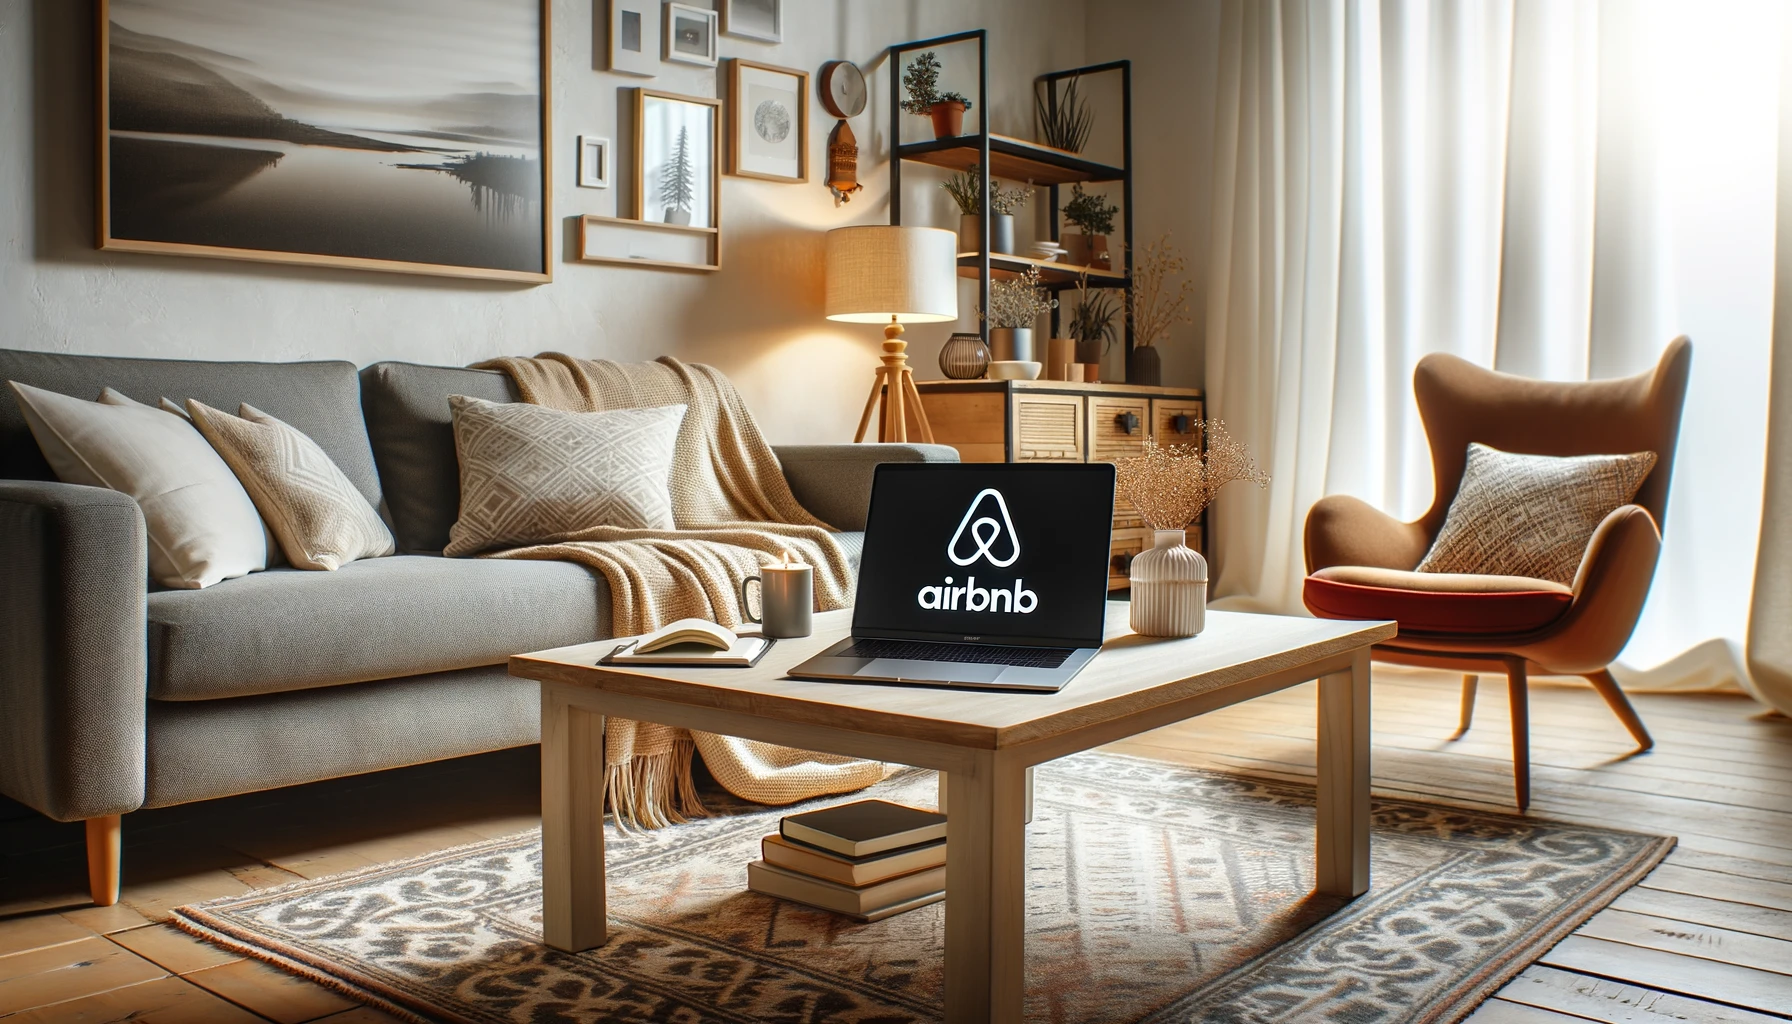 Stylish Airbnb living room with a laptop showcasing the Airbnb logo.